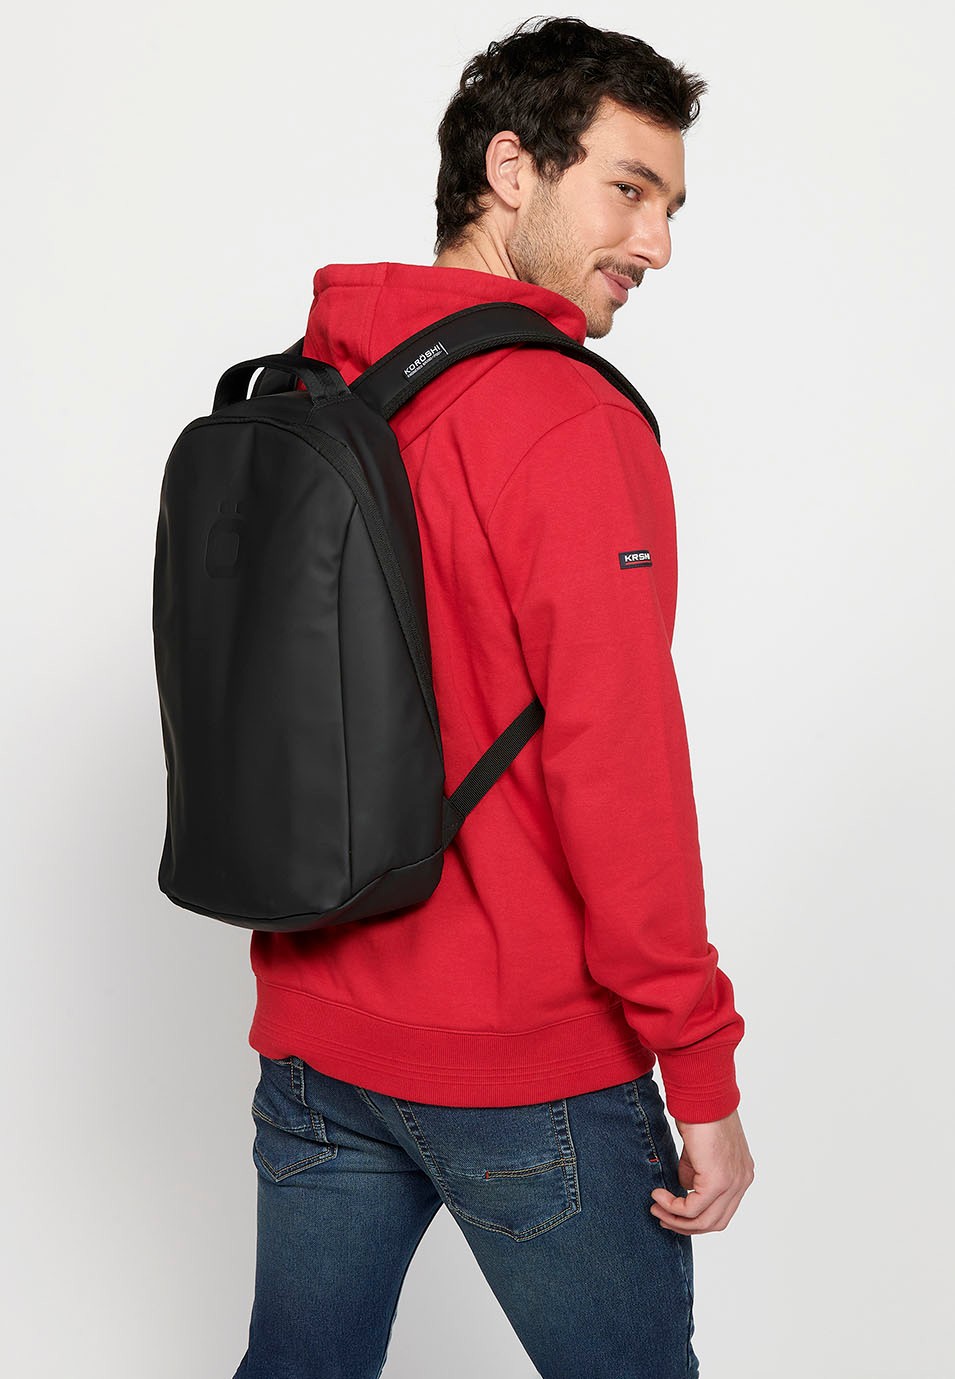 Koröshi Backpack with zipper closure and interior laptop pocket in Black 7